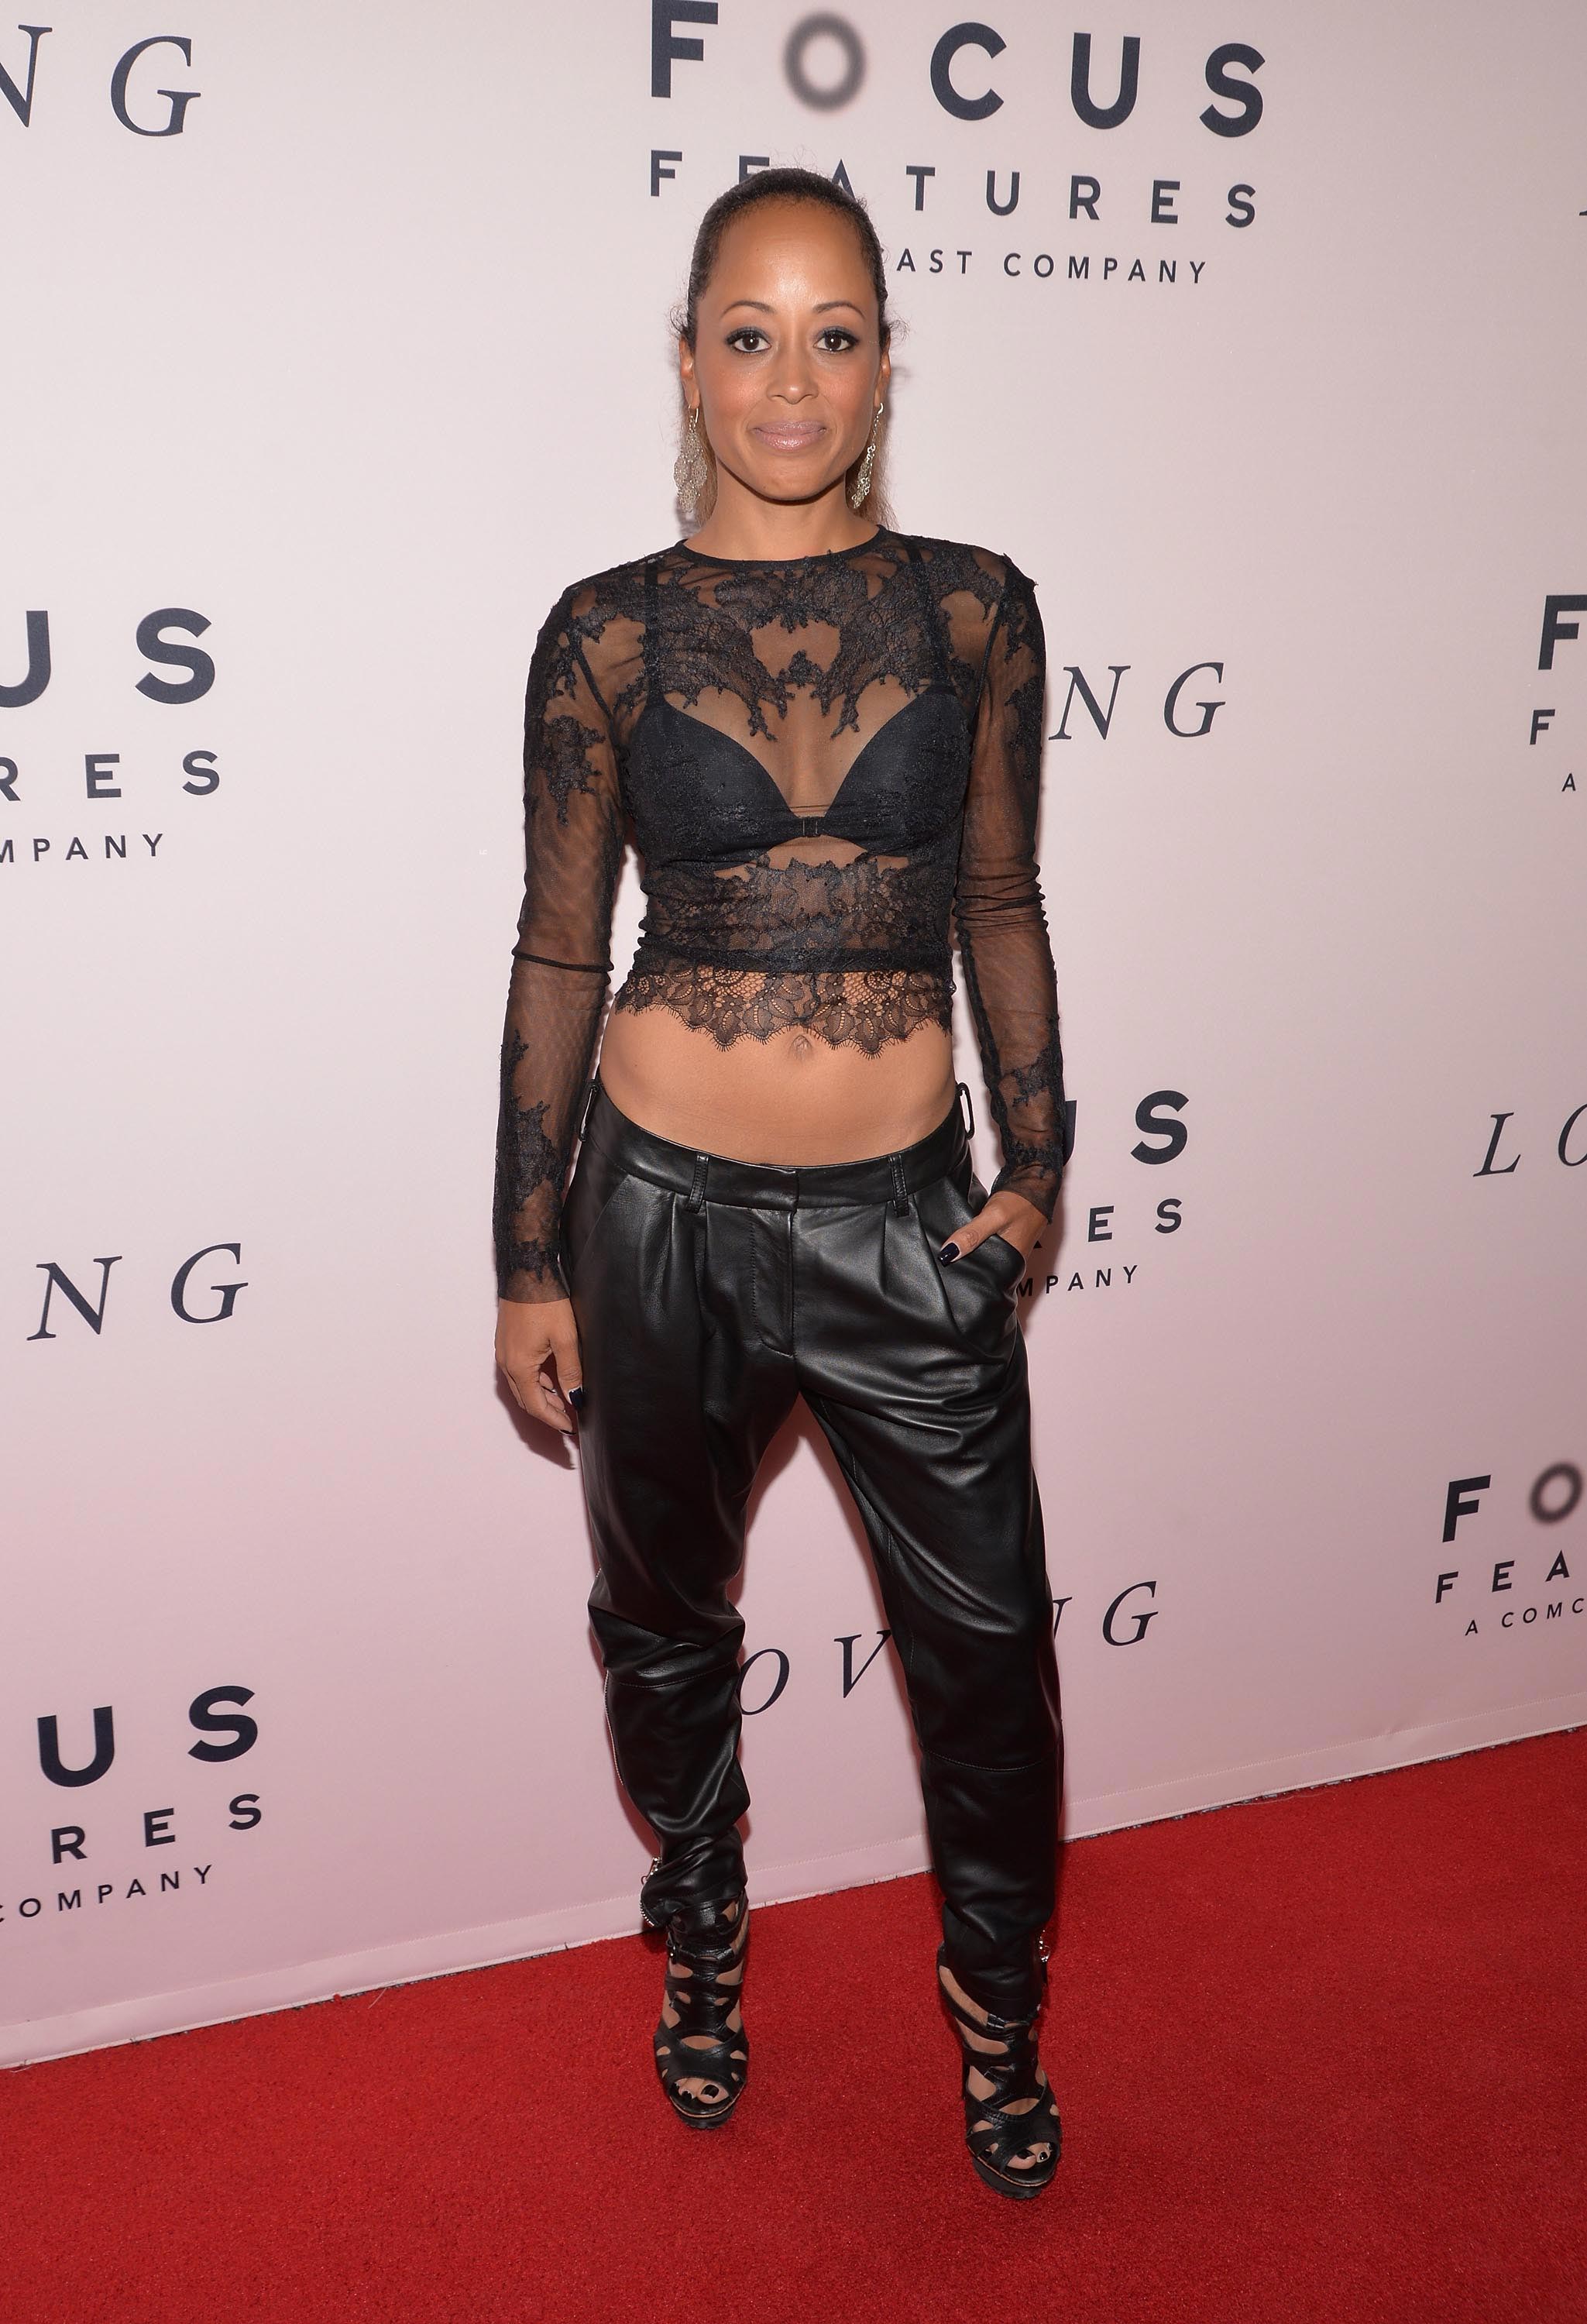 Essence Atkins attends the premiere of Loving